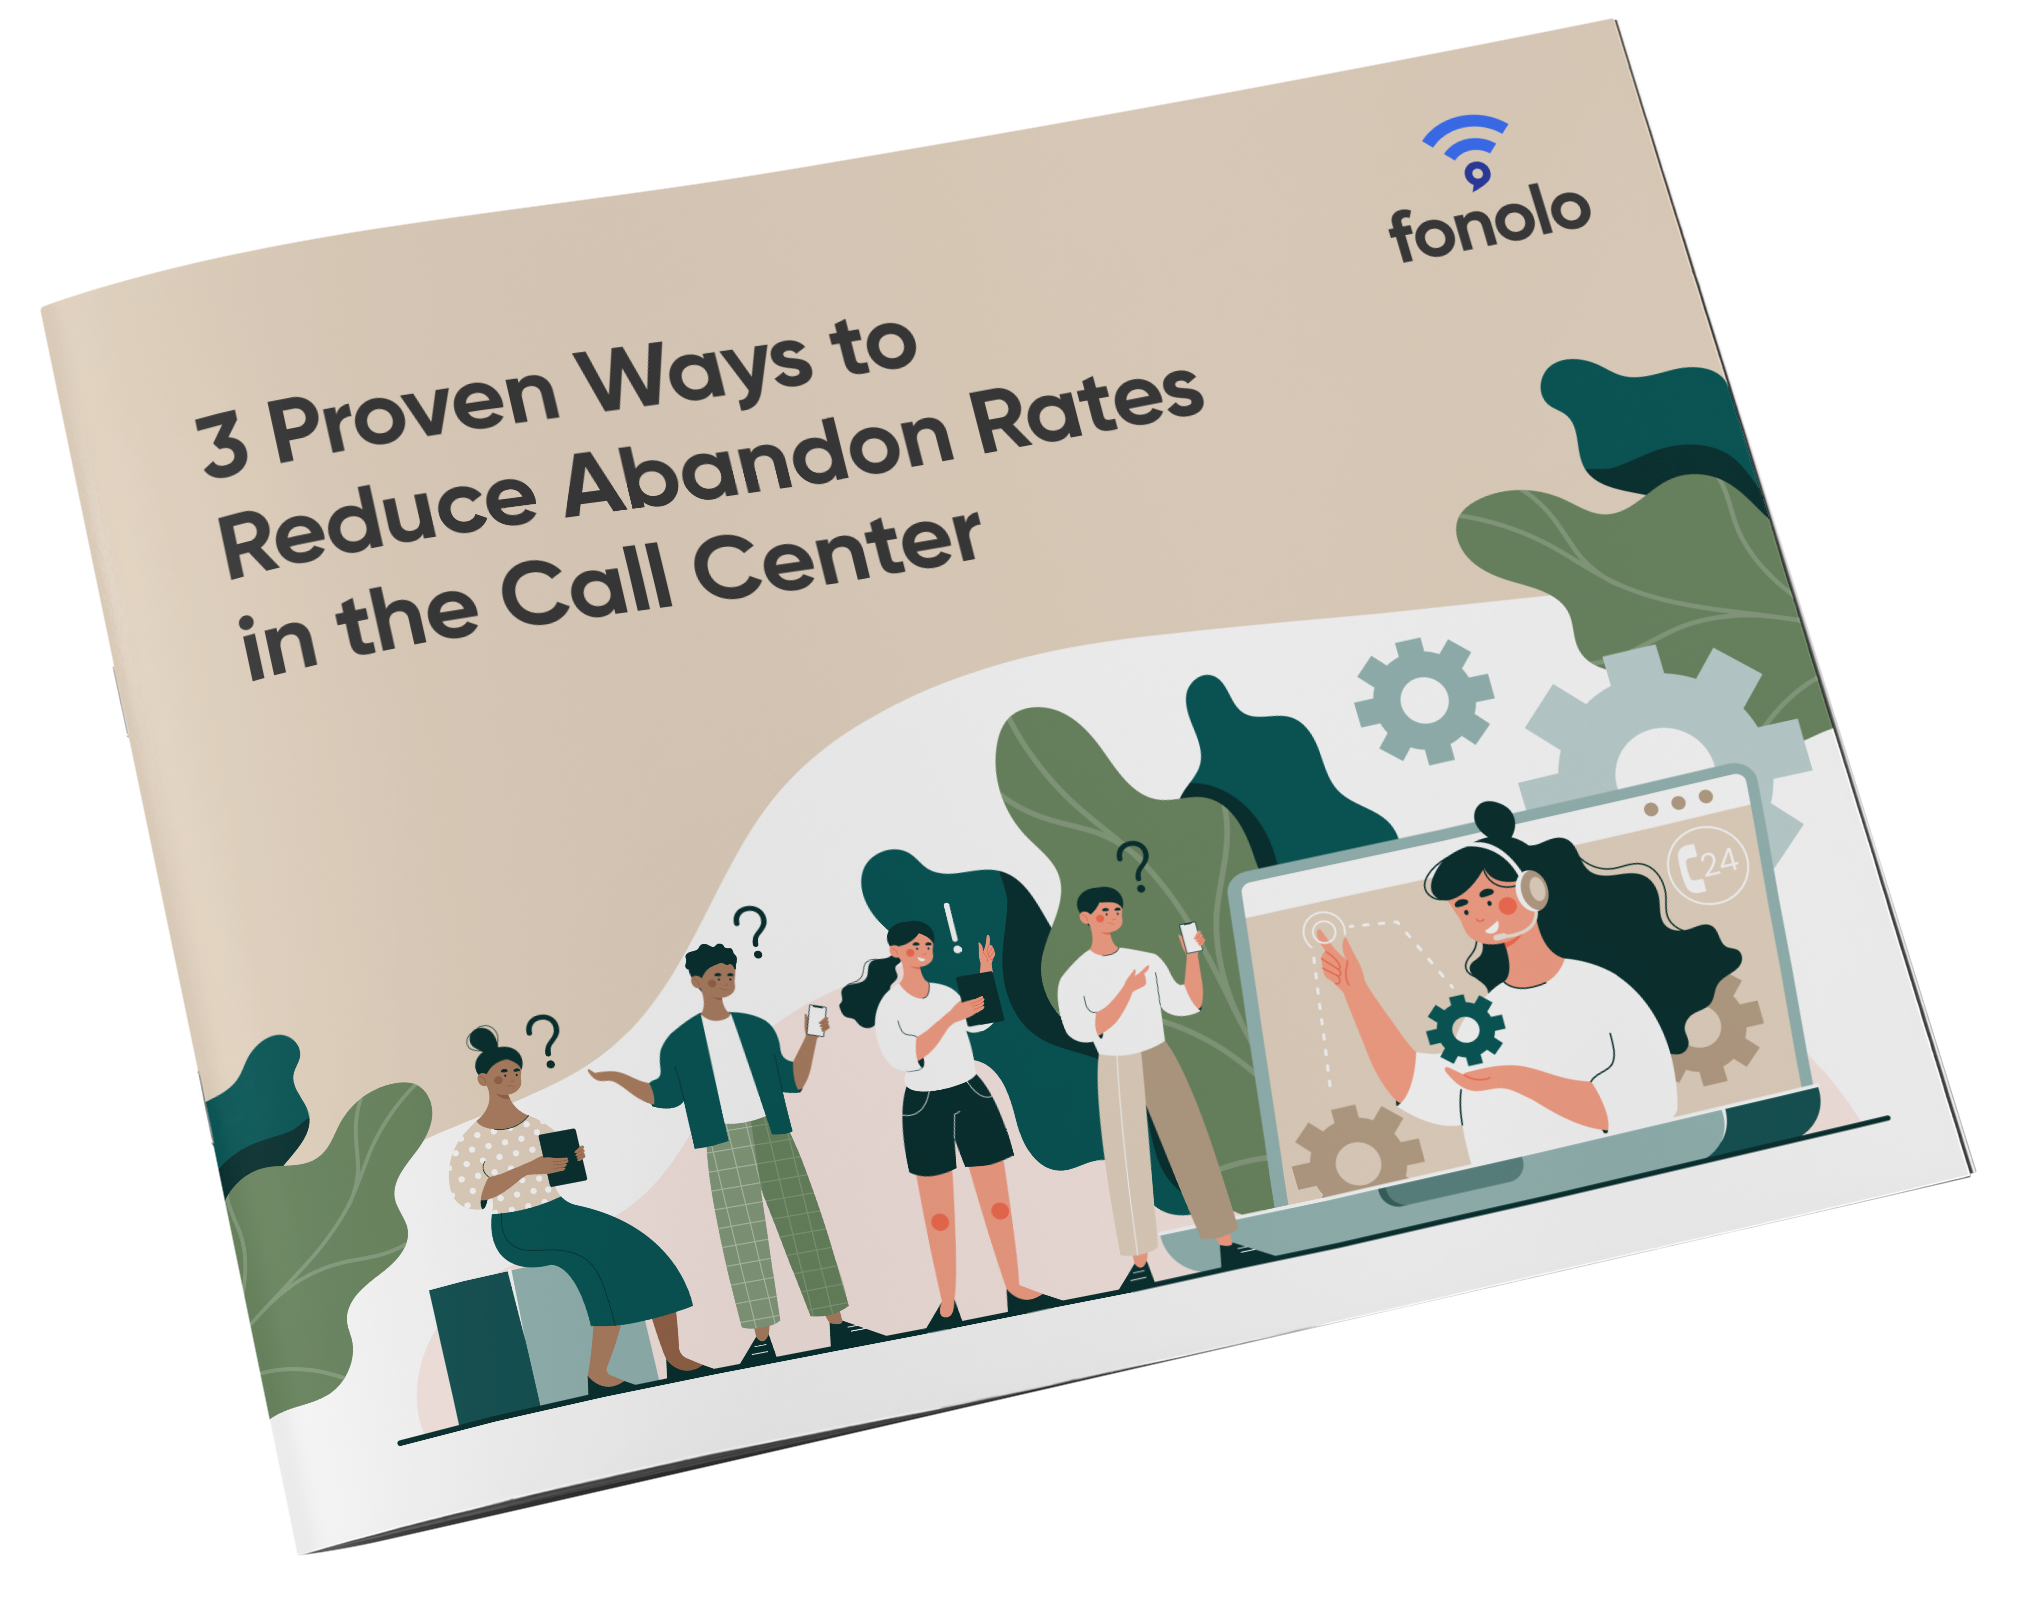 3-Proven-Ways-to Reduce-Abandon-Rates-in-the-Call Center